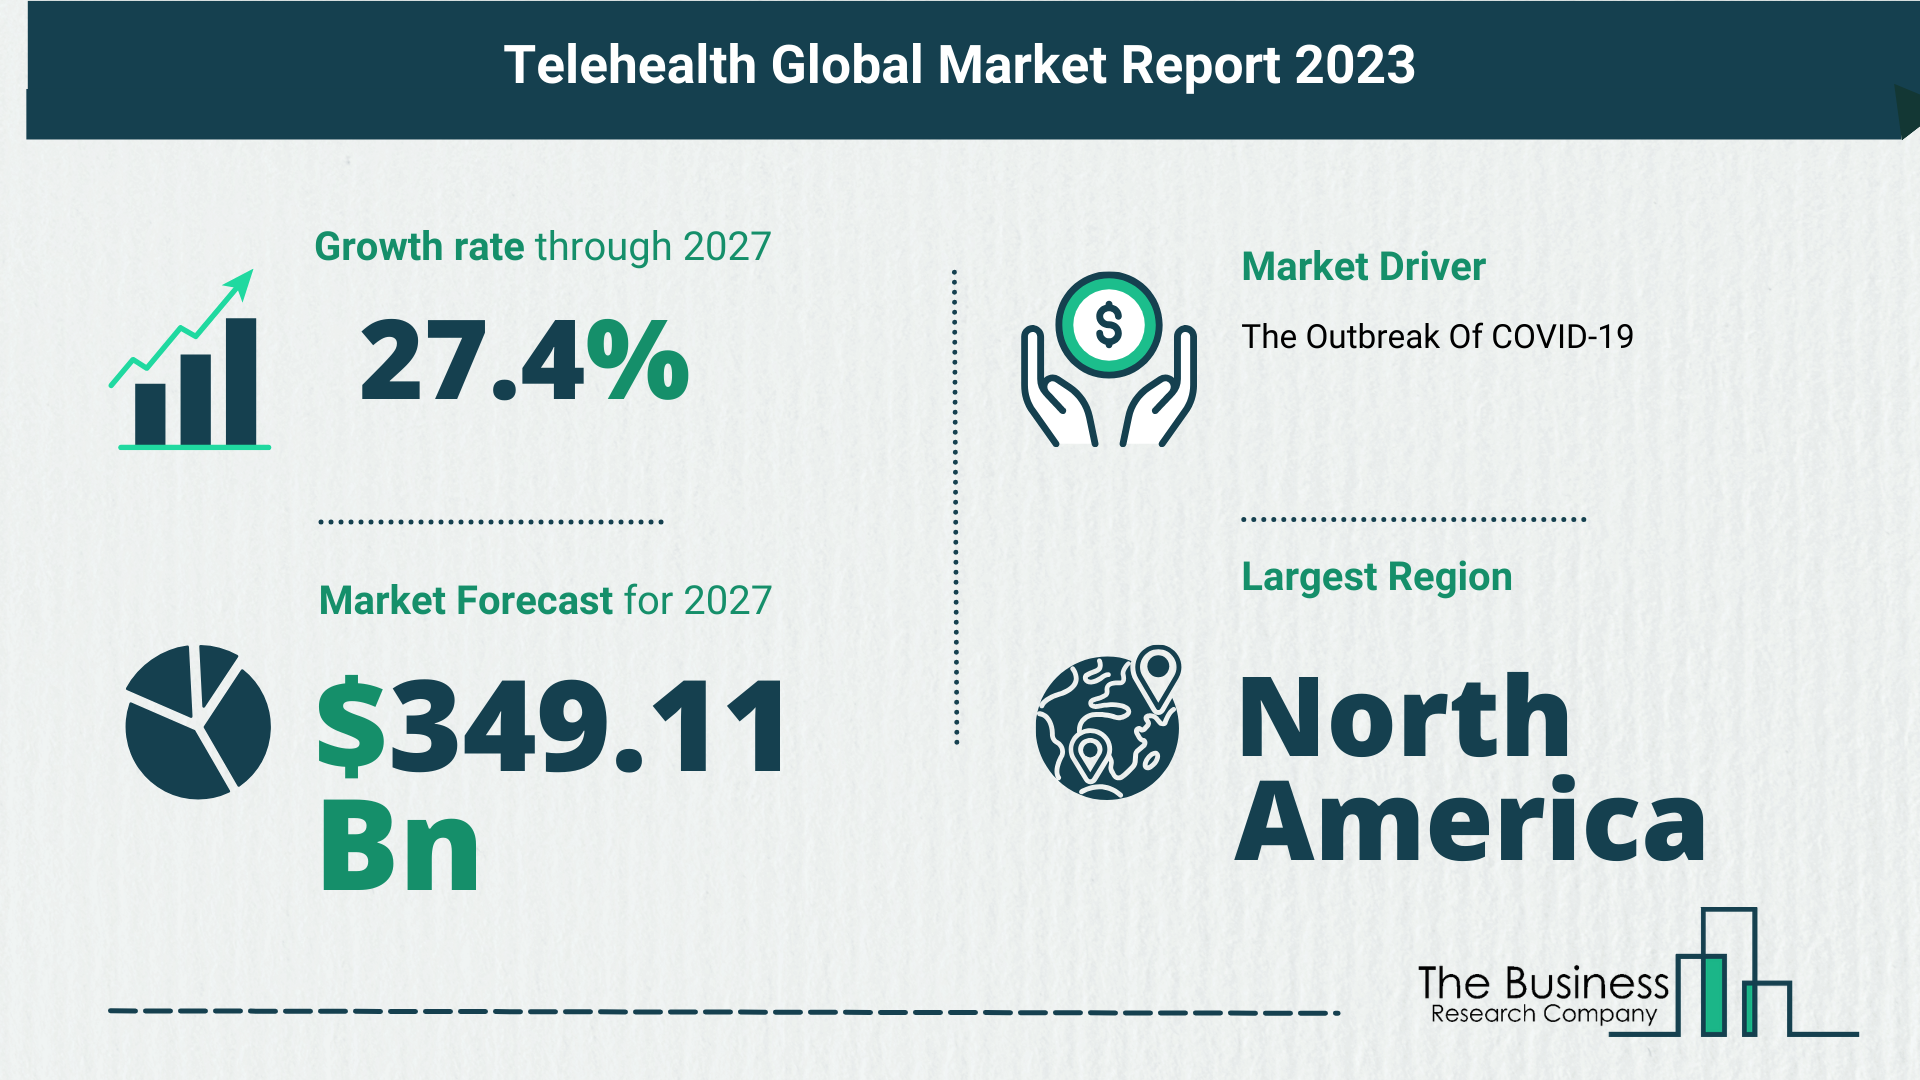 How Is The Telehealth Market Expected To Grow Through 2023-2032